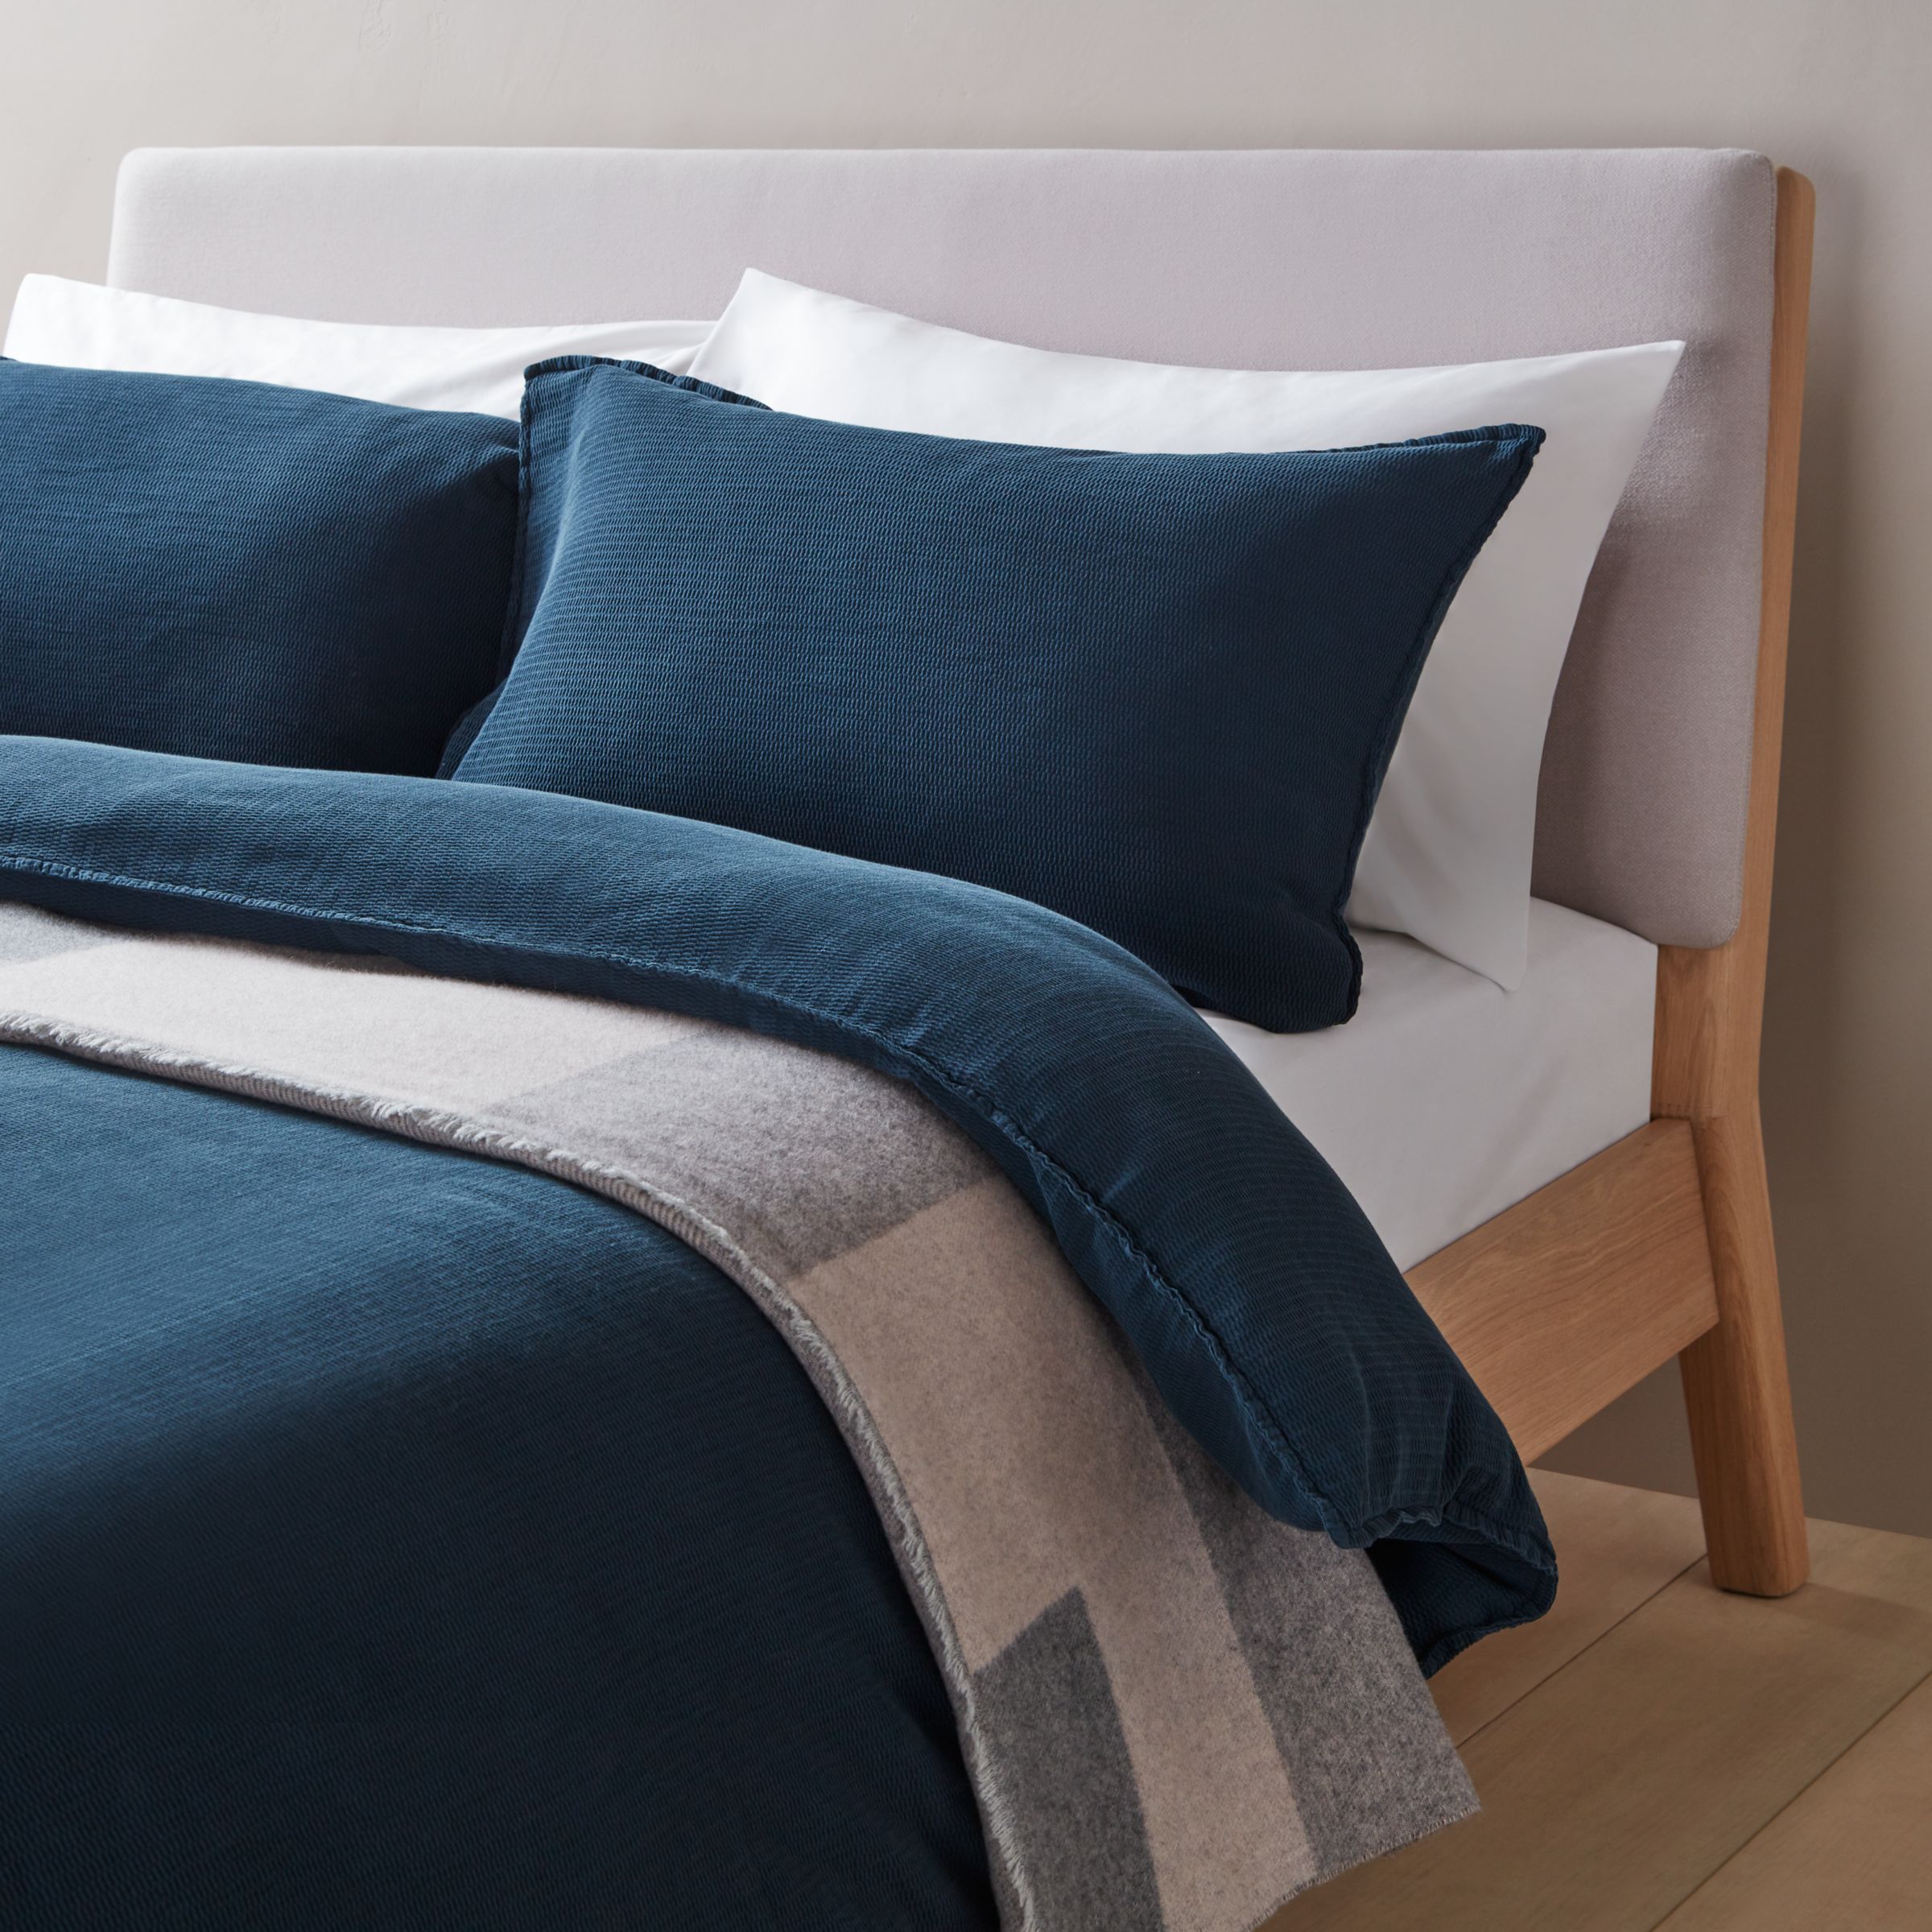 Design Project By John Lewis No 144 Bedding Navy At John Lewis